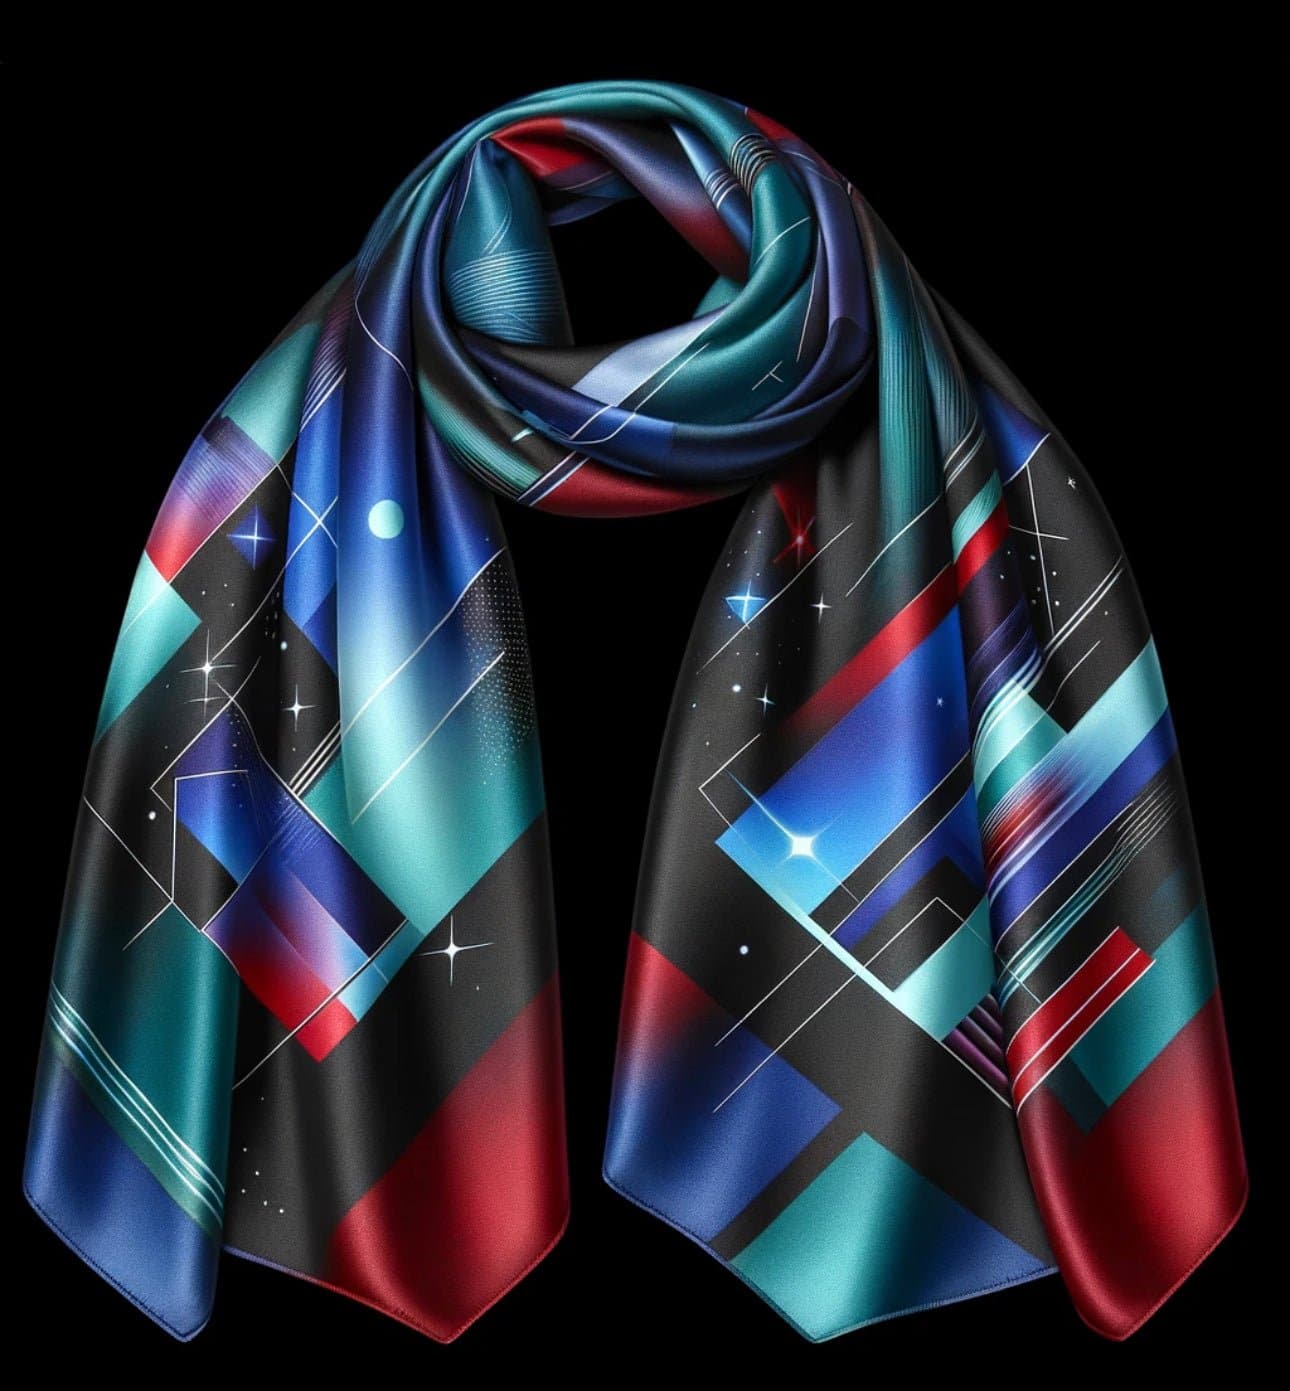 Empowered Essence Scarf - Exici